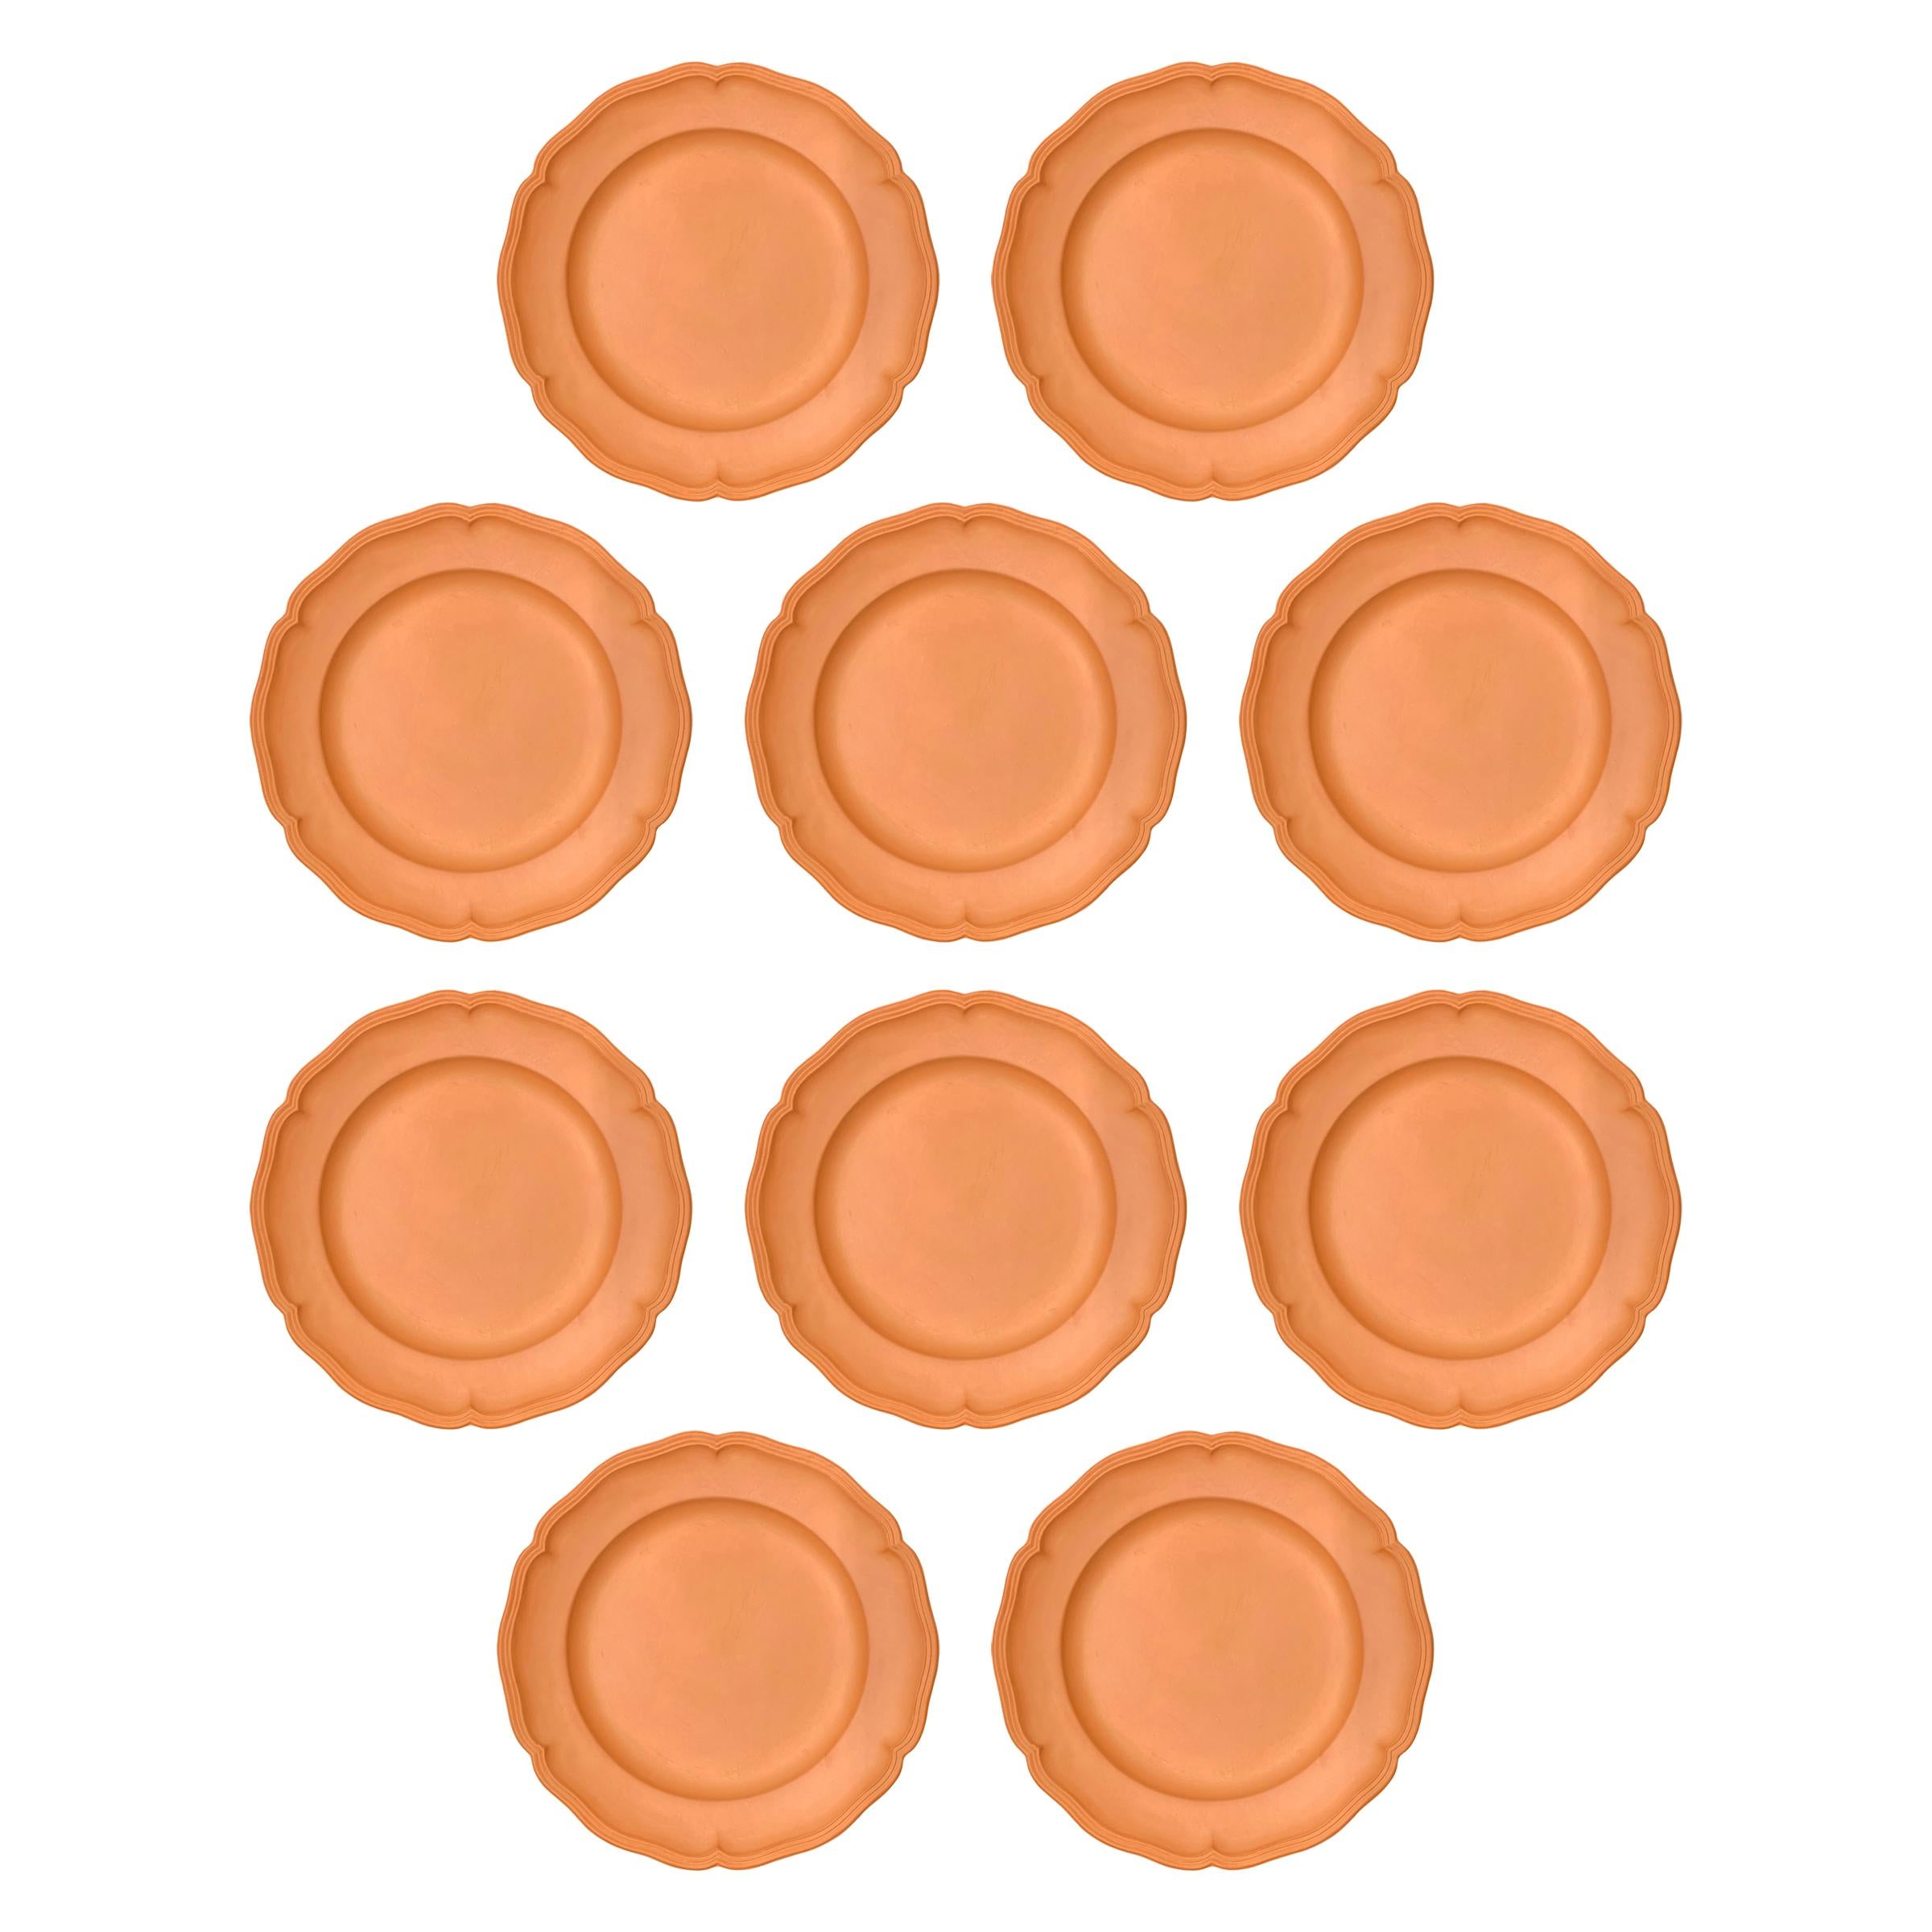 A set of ten vintage terracotta dinner plates with scalloped edges, perfect for your next garden party!